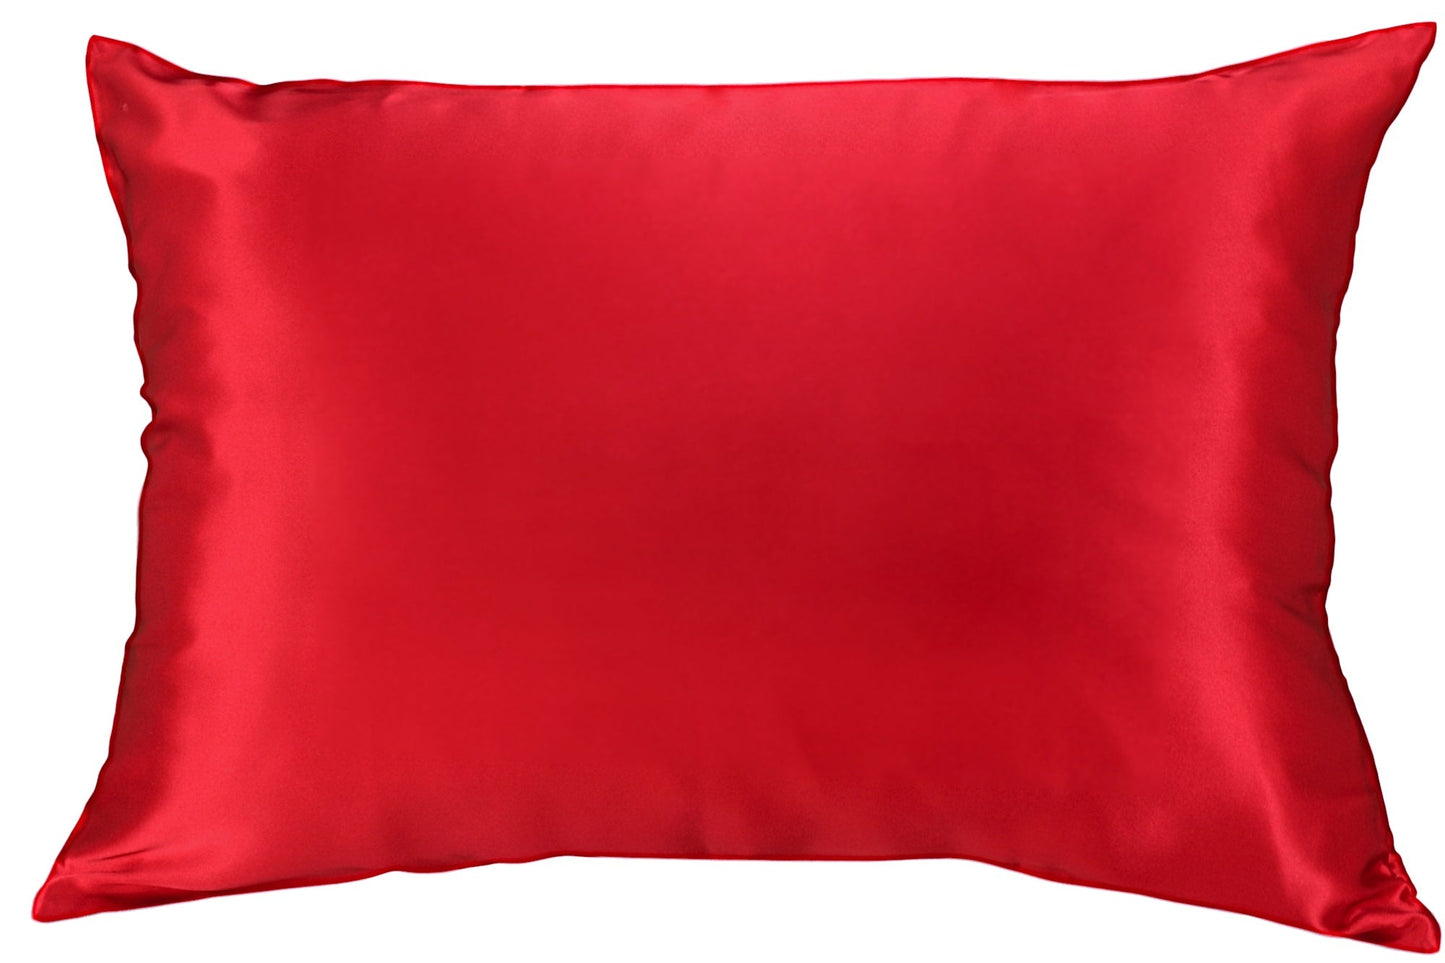 25 Momme Silk Pillowcase - Queen Bright Red Envelope Closure - Outlet